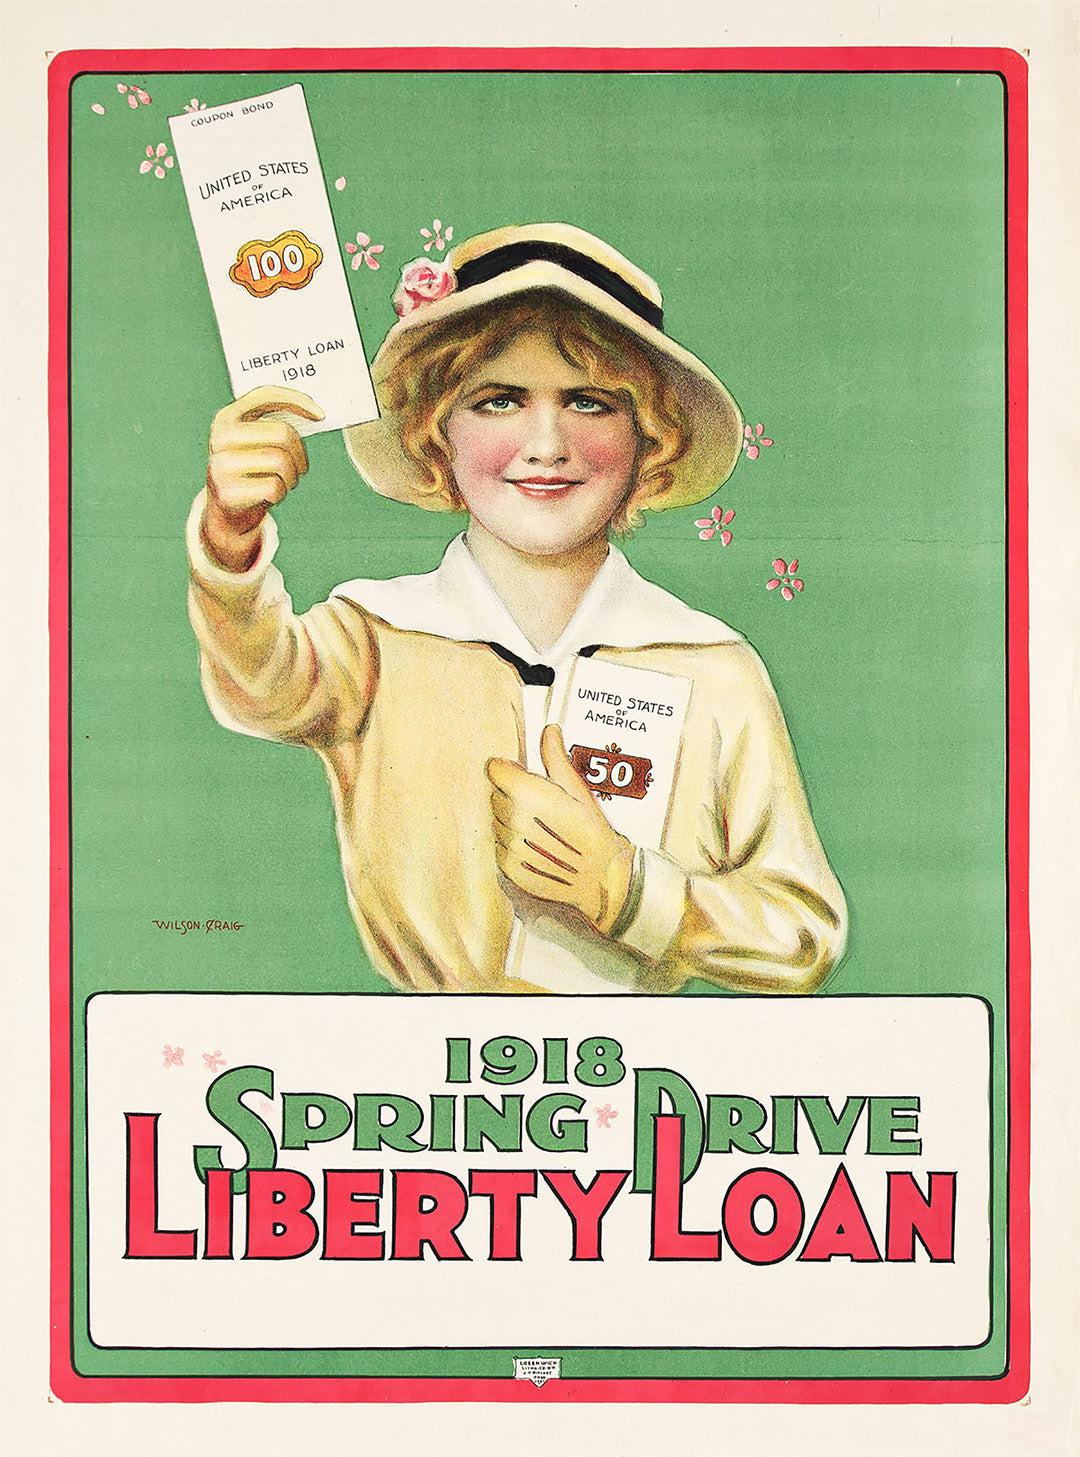 Original Vintage WWI 1918 Spring Drive Liberty Loan Poster by Wison Craig